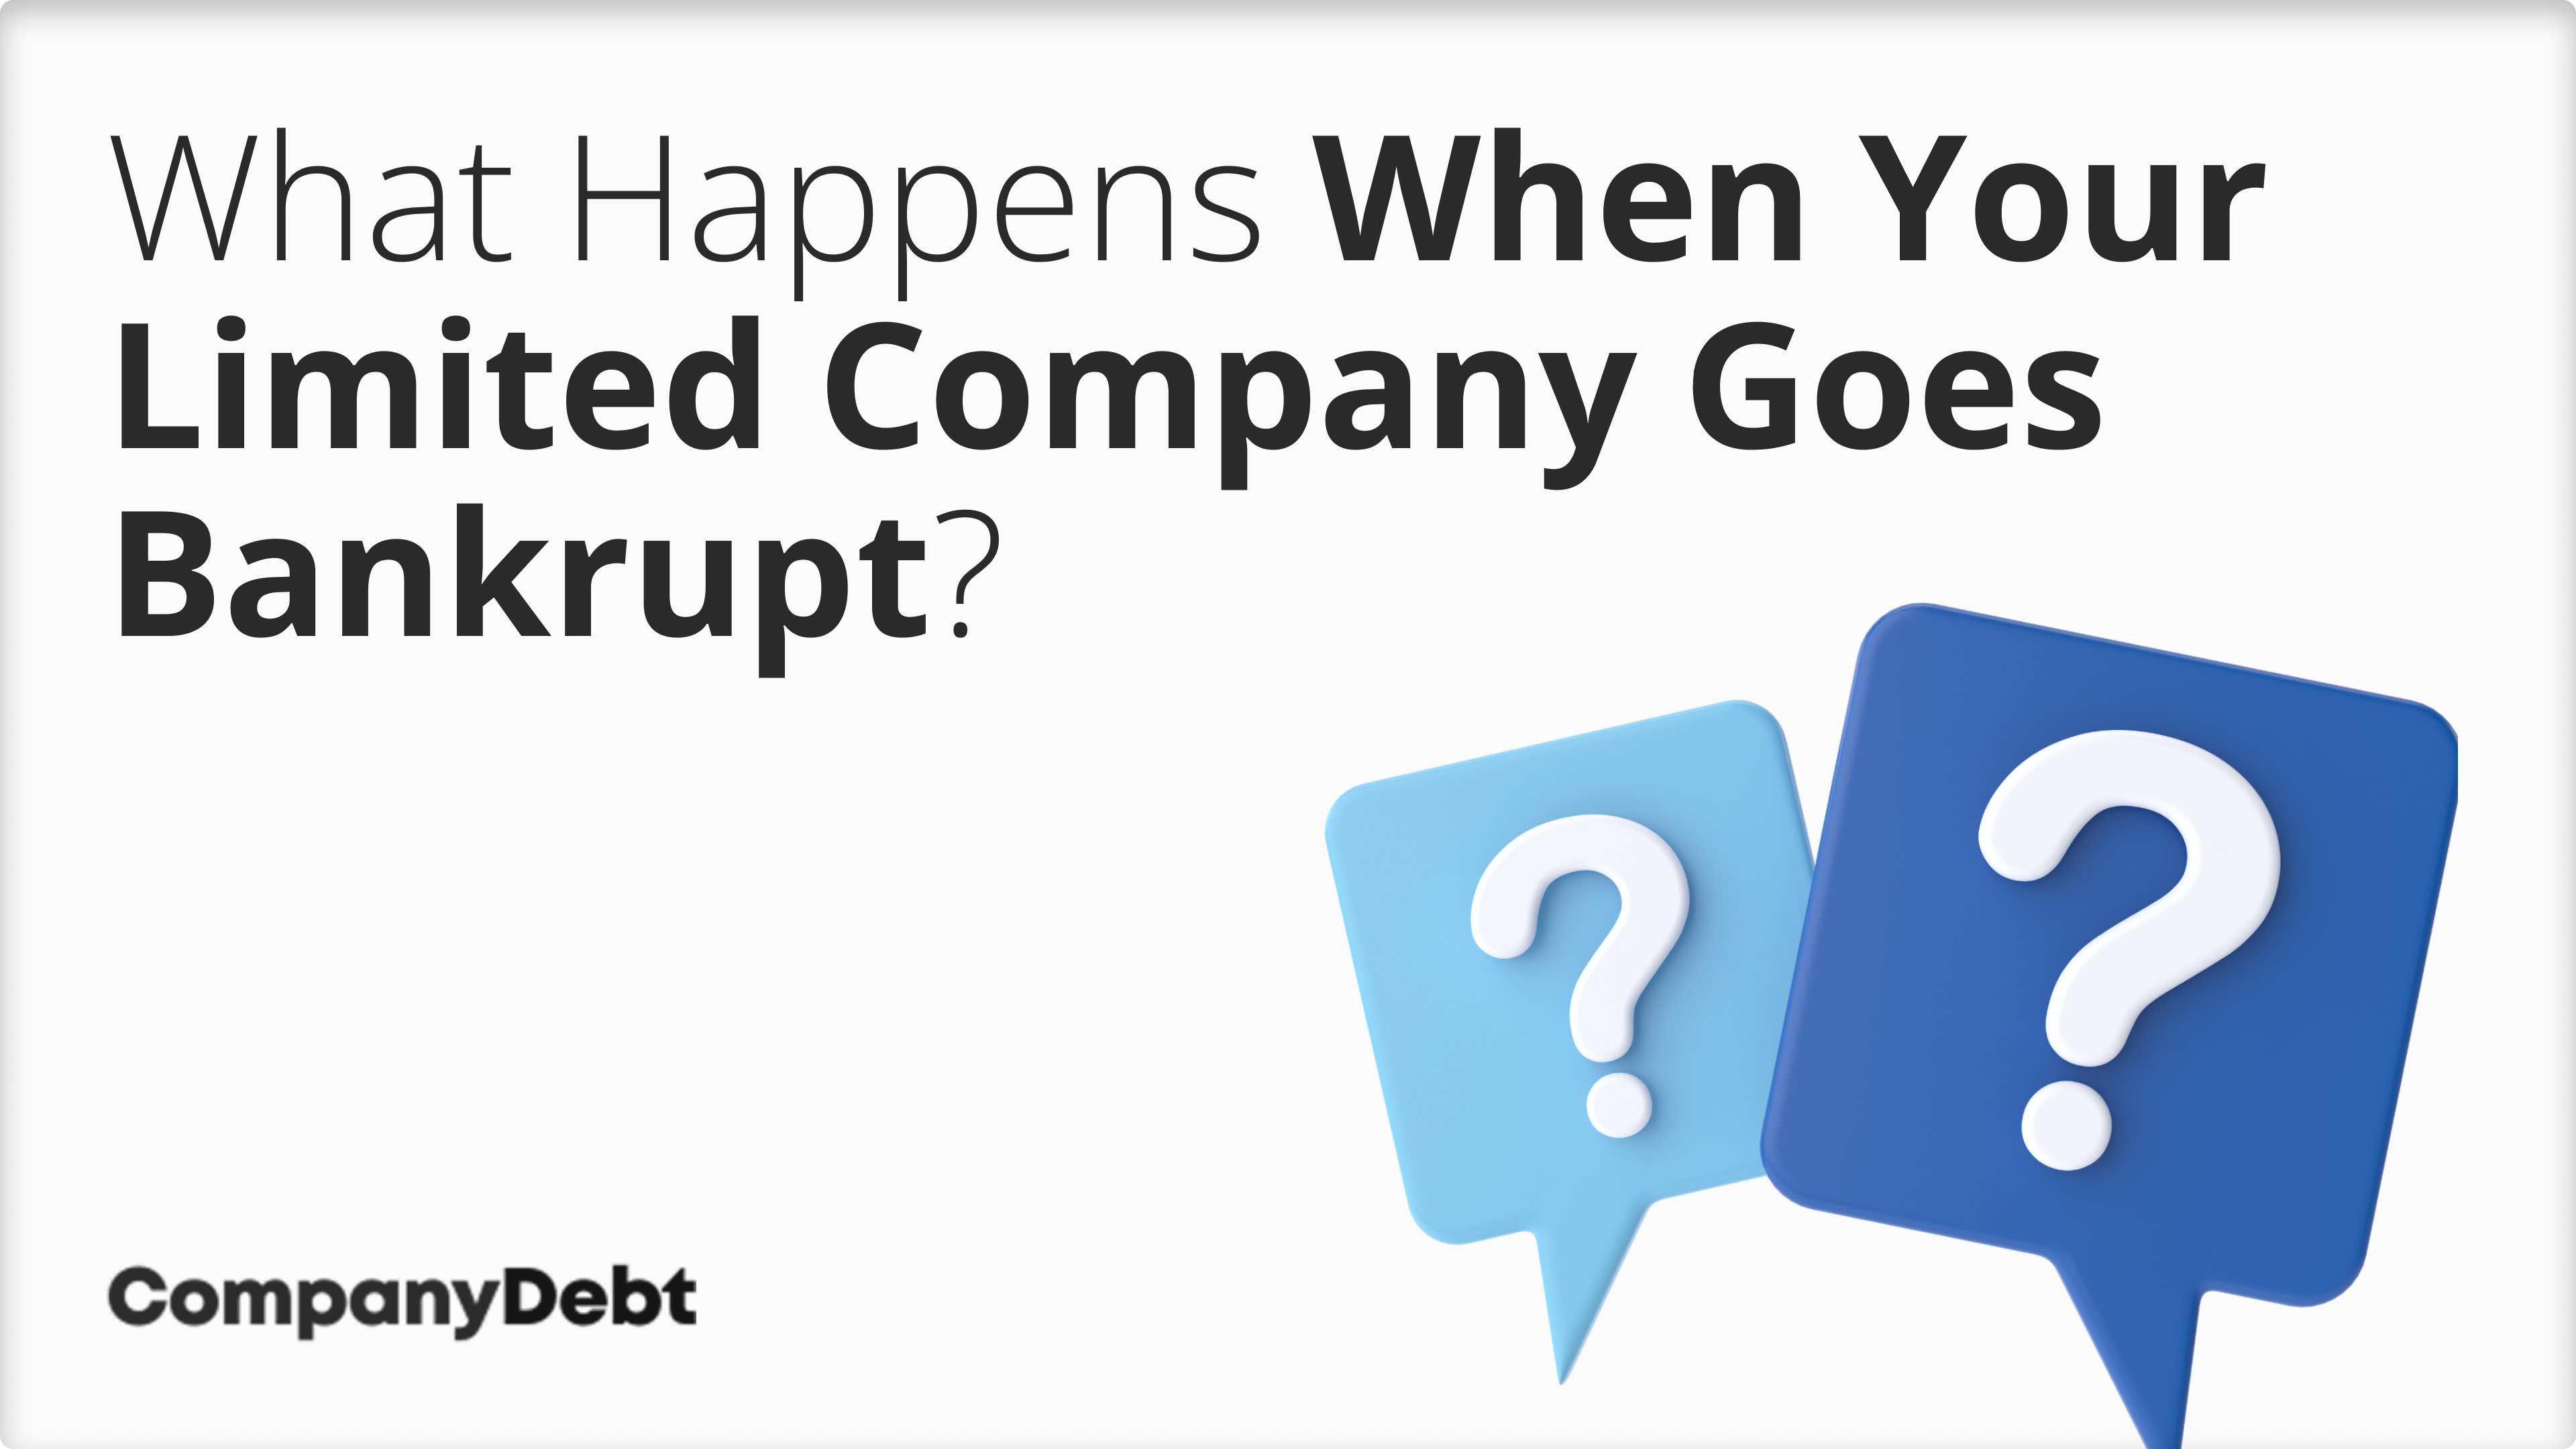 What Happens When Your Limited Company Goes Bankrupt?